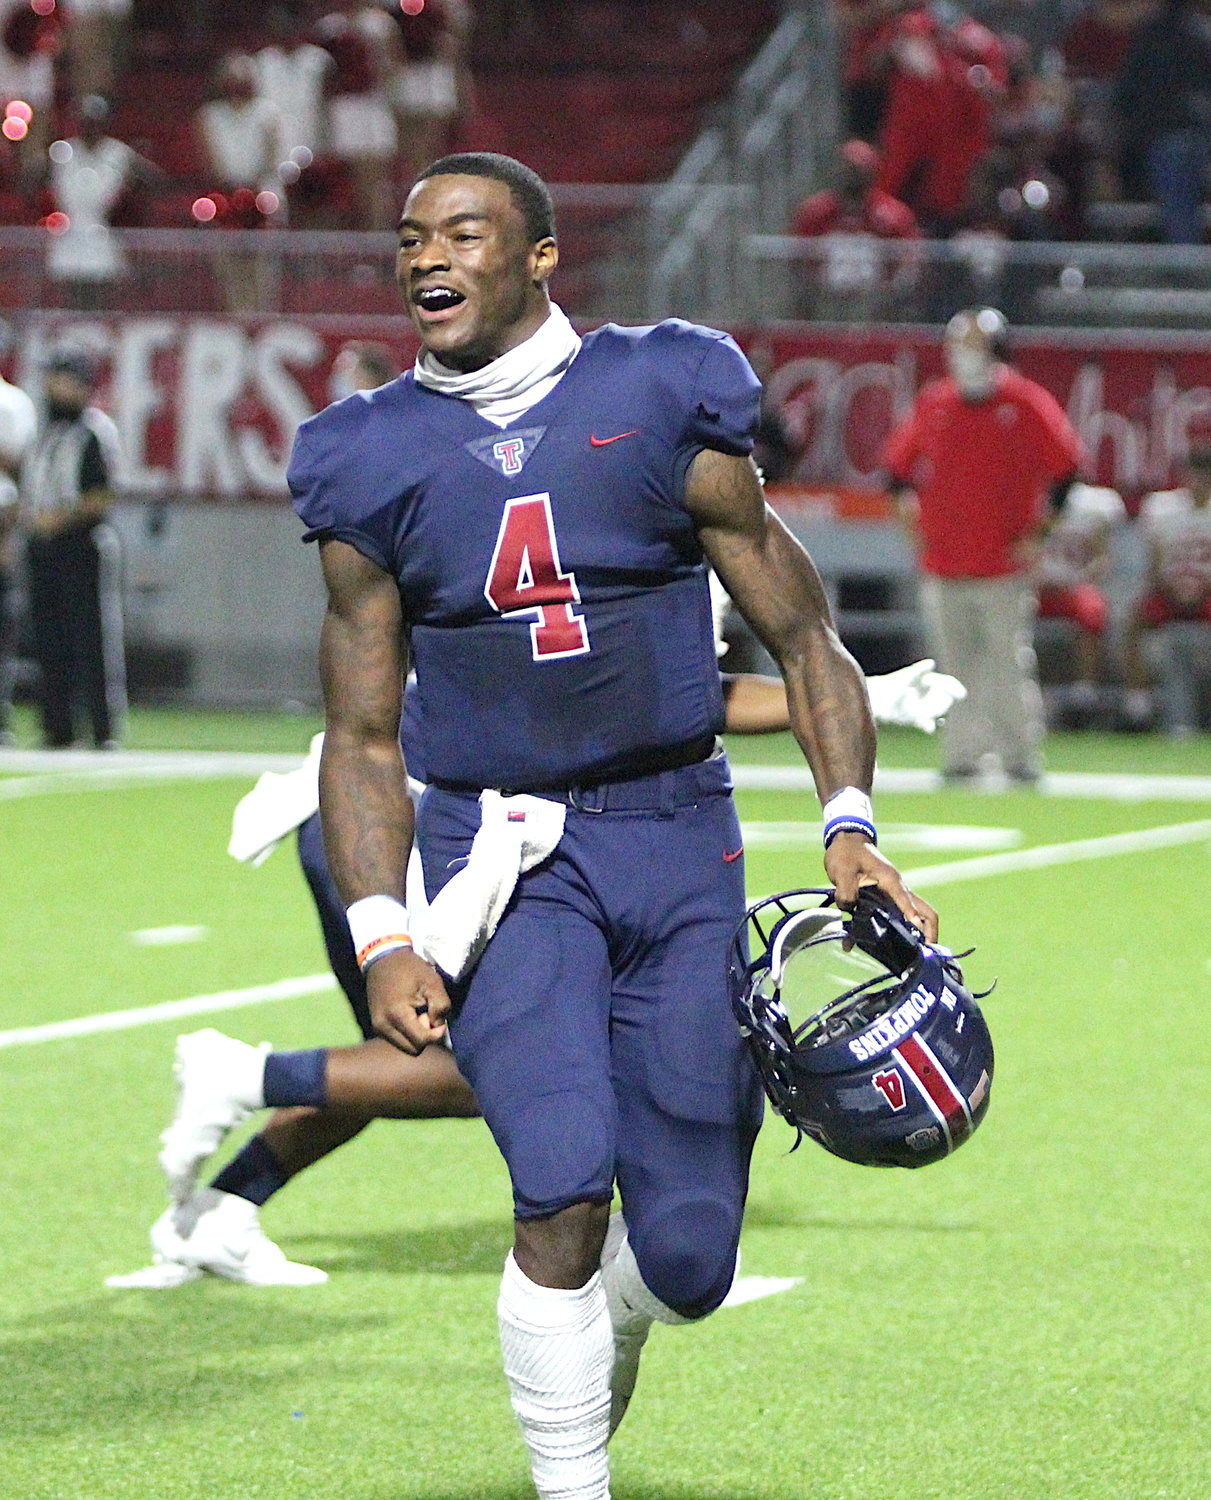 Tompkins senior quarterback Jalen Milroe celebrates after the Falcons' 24-19 win over Katy on Nov. 5 that snapped the Tigers' 75-game district winning streak.